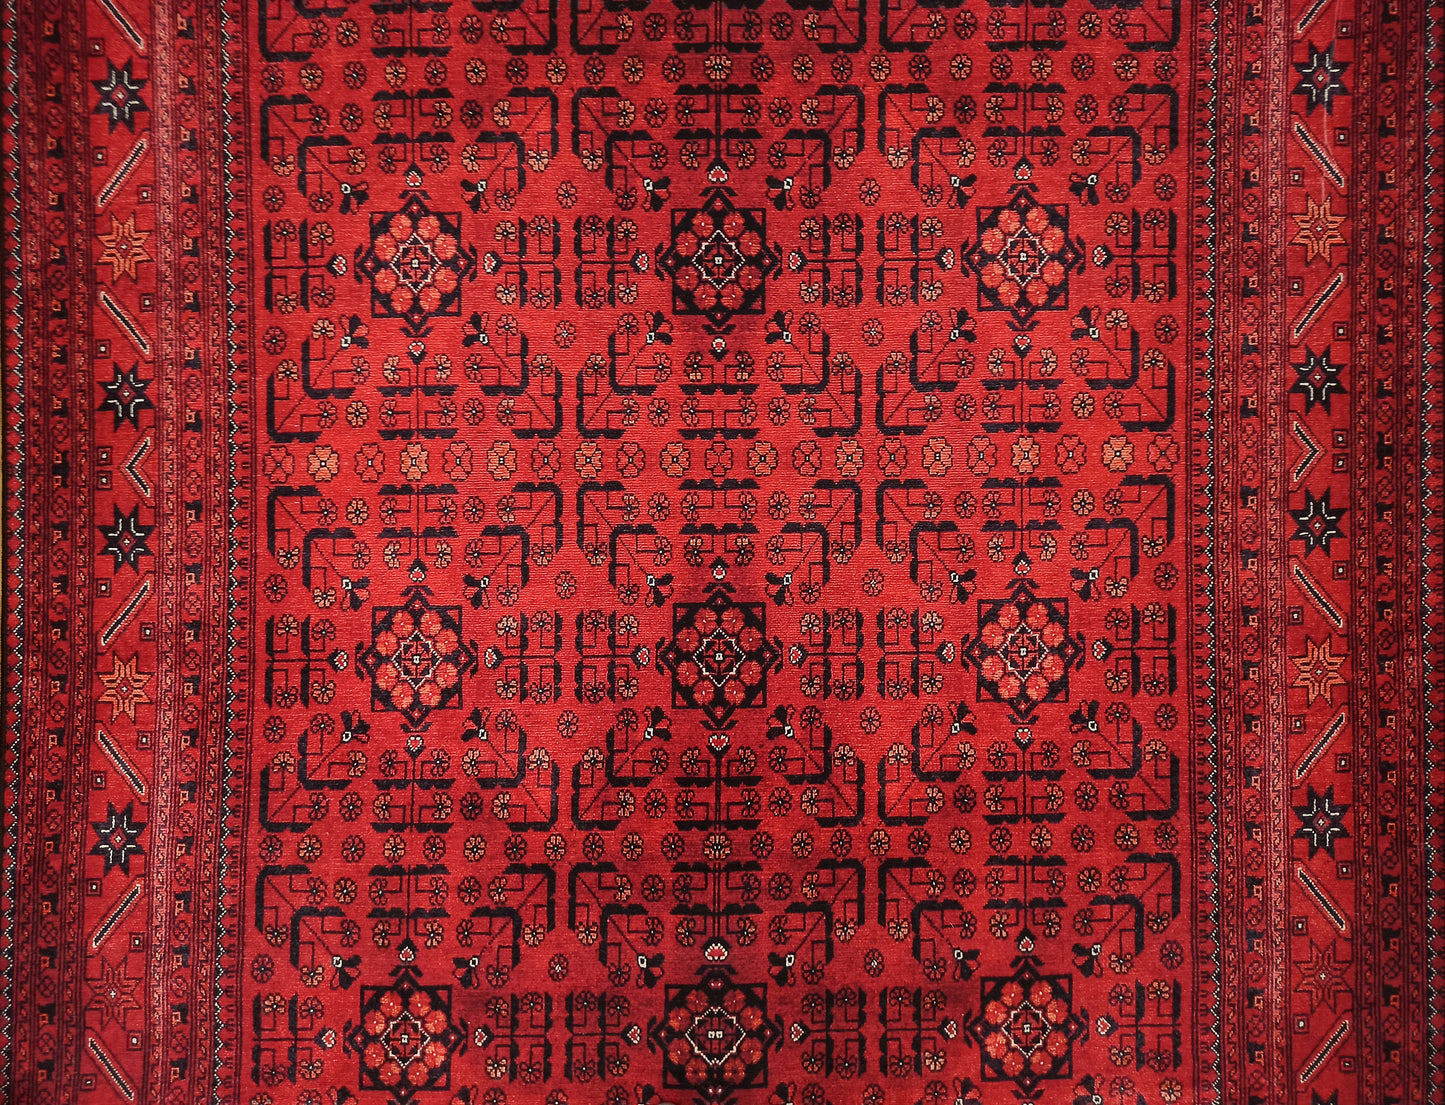 ZANAN | Turkish Rug, Red Vintage Distressed look, Faded Area rug, Bohemian Floral Turkmen style, Mid-century Modern Home decor, Fame Rugs